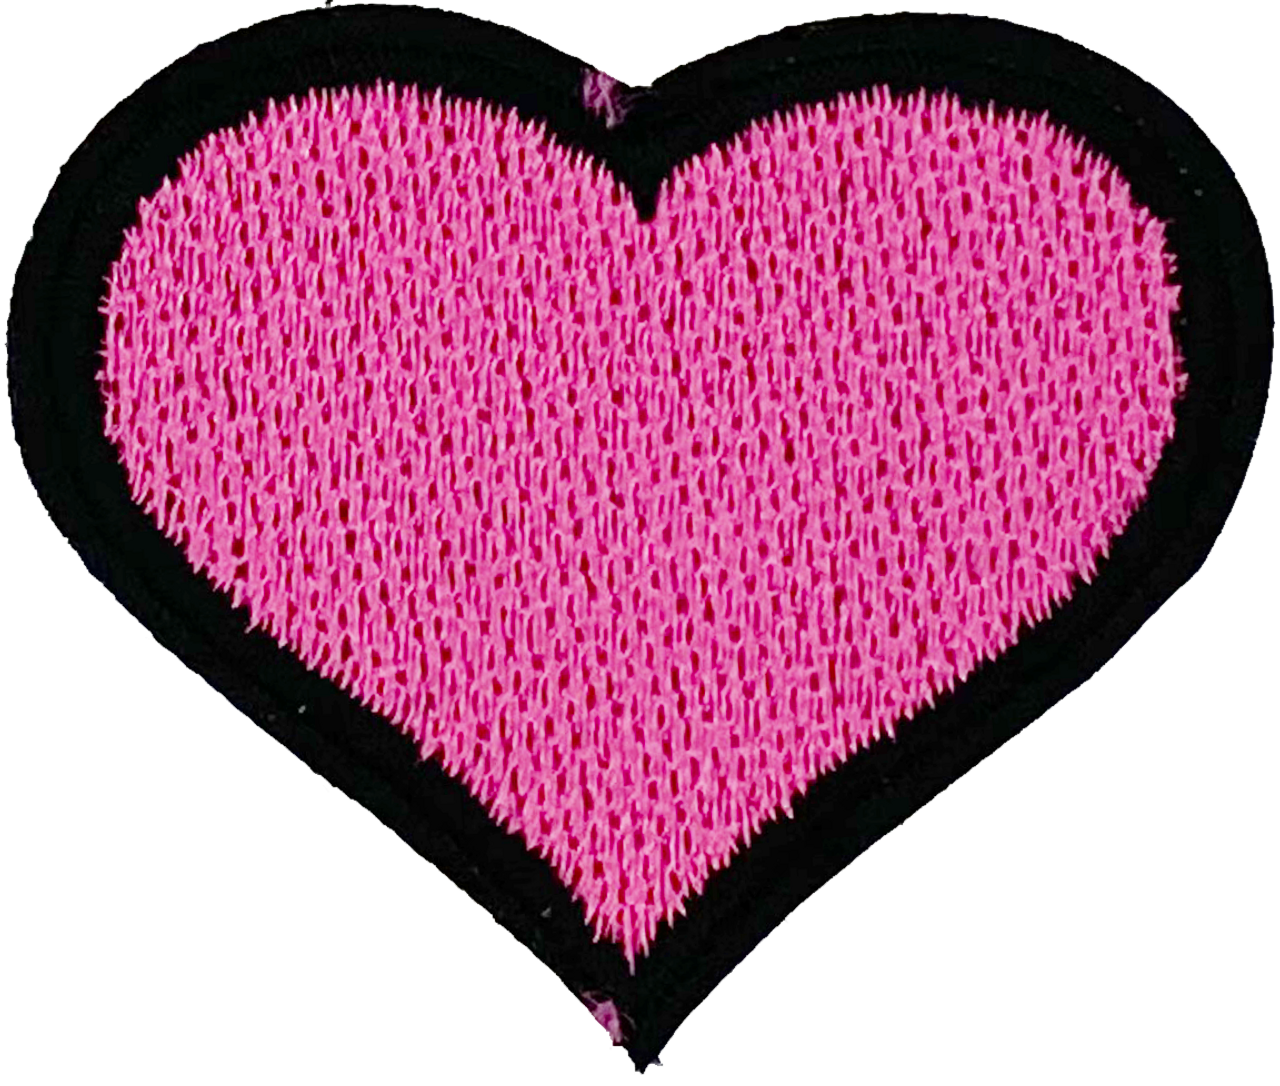 Pink with Black Heart - Patch